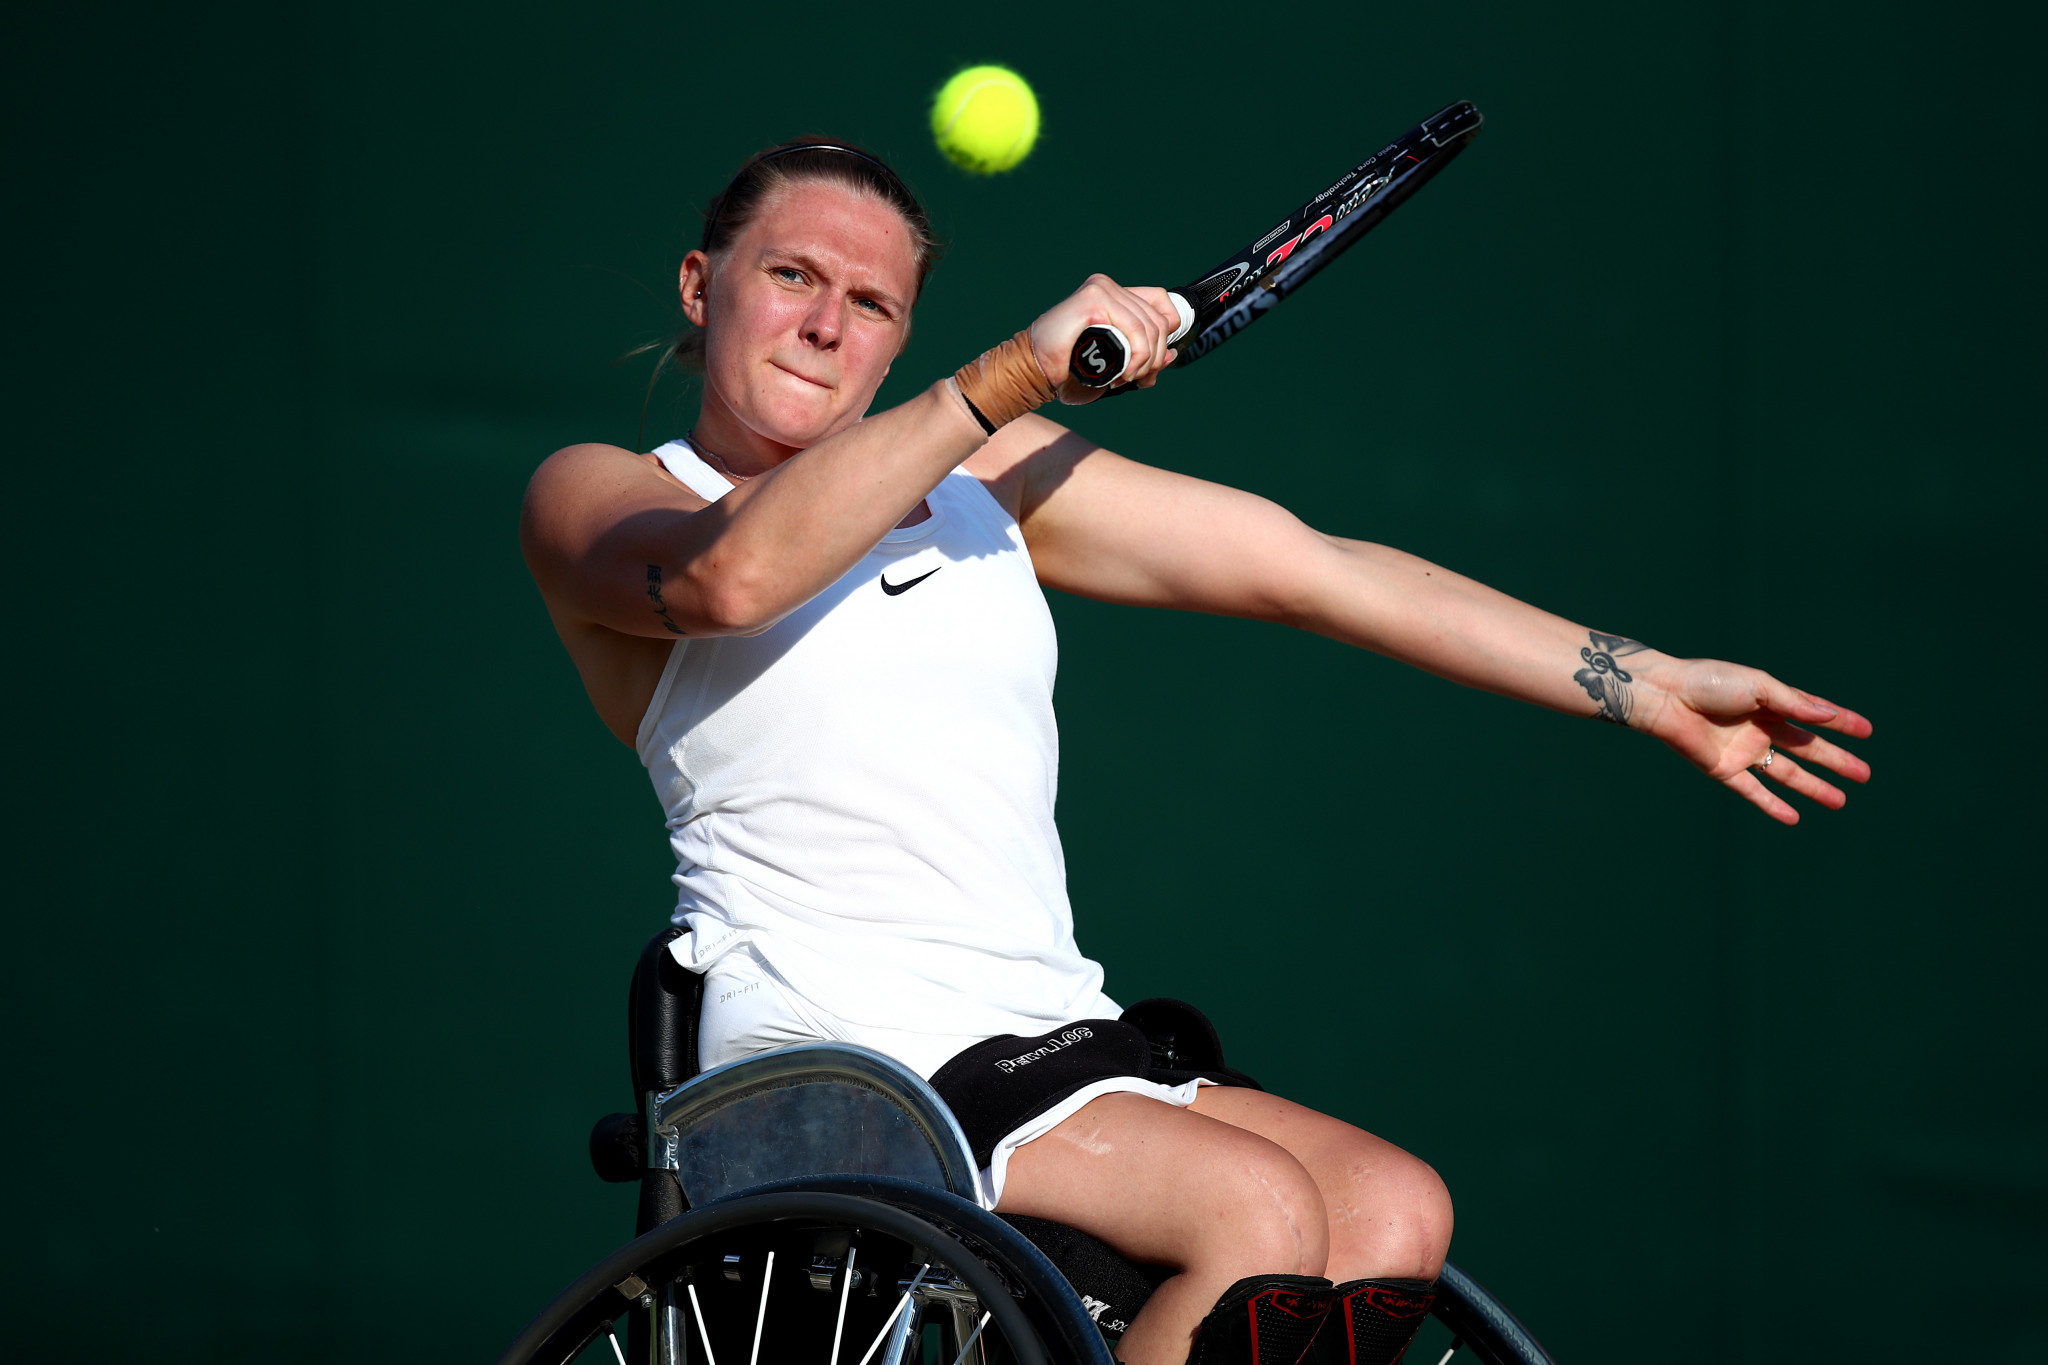 British 11-times Grand Slam winner Whiley considering retirement after Tokyo Paralympics